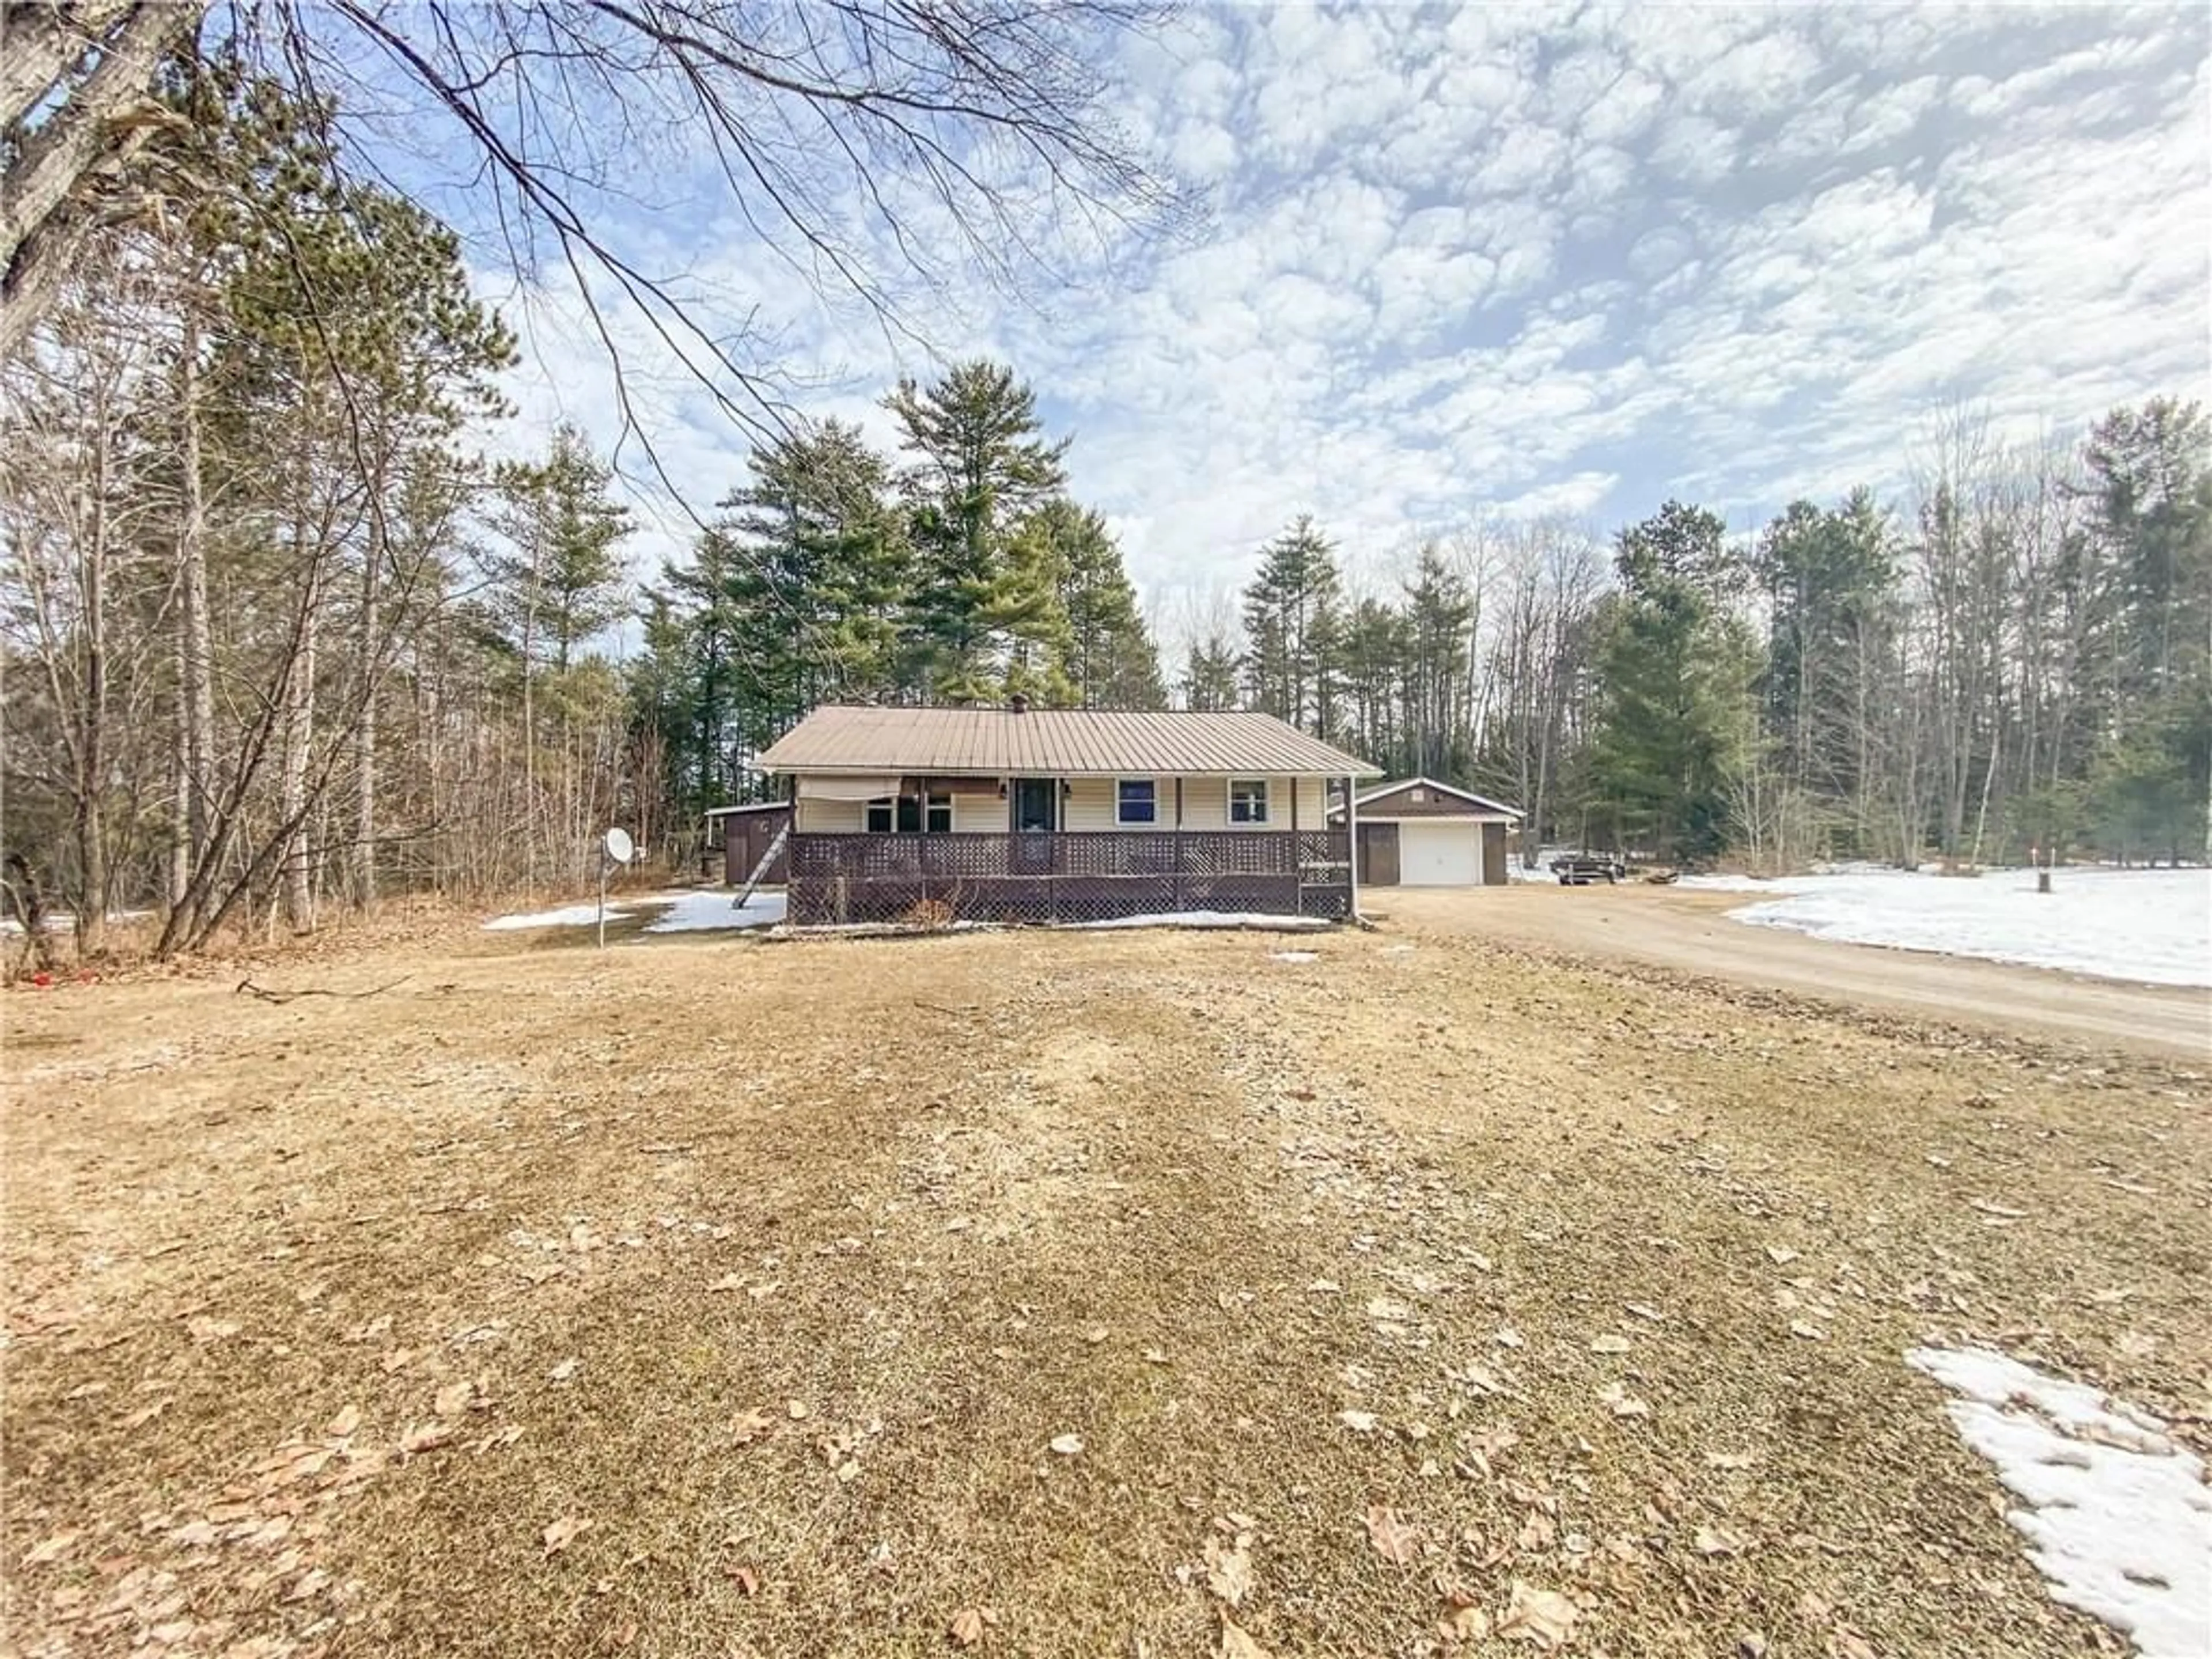 Cottage for 40460 17 Hwy, Stonecliffe Ontario K0J 2K0